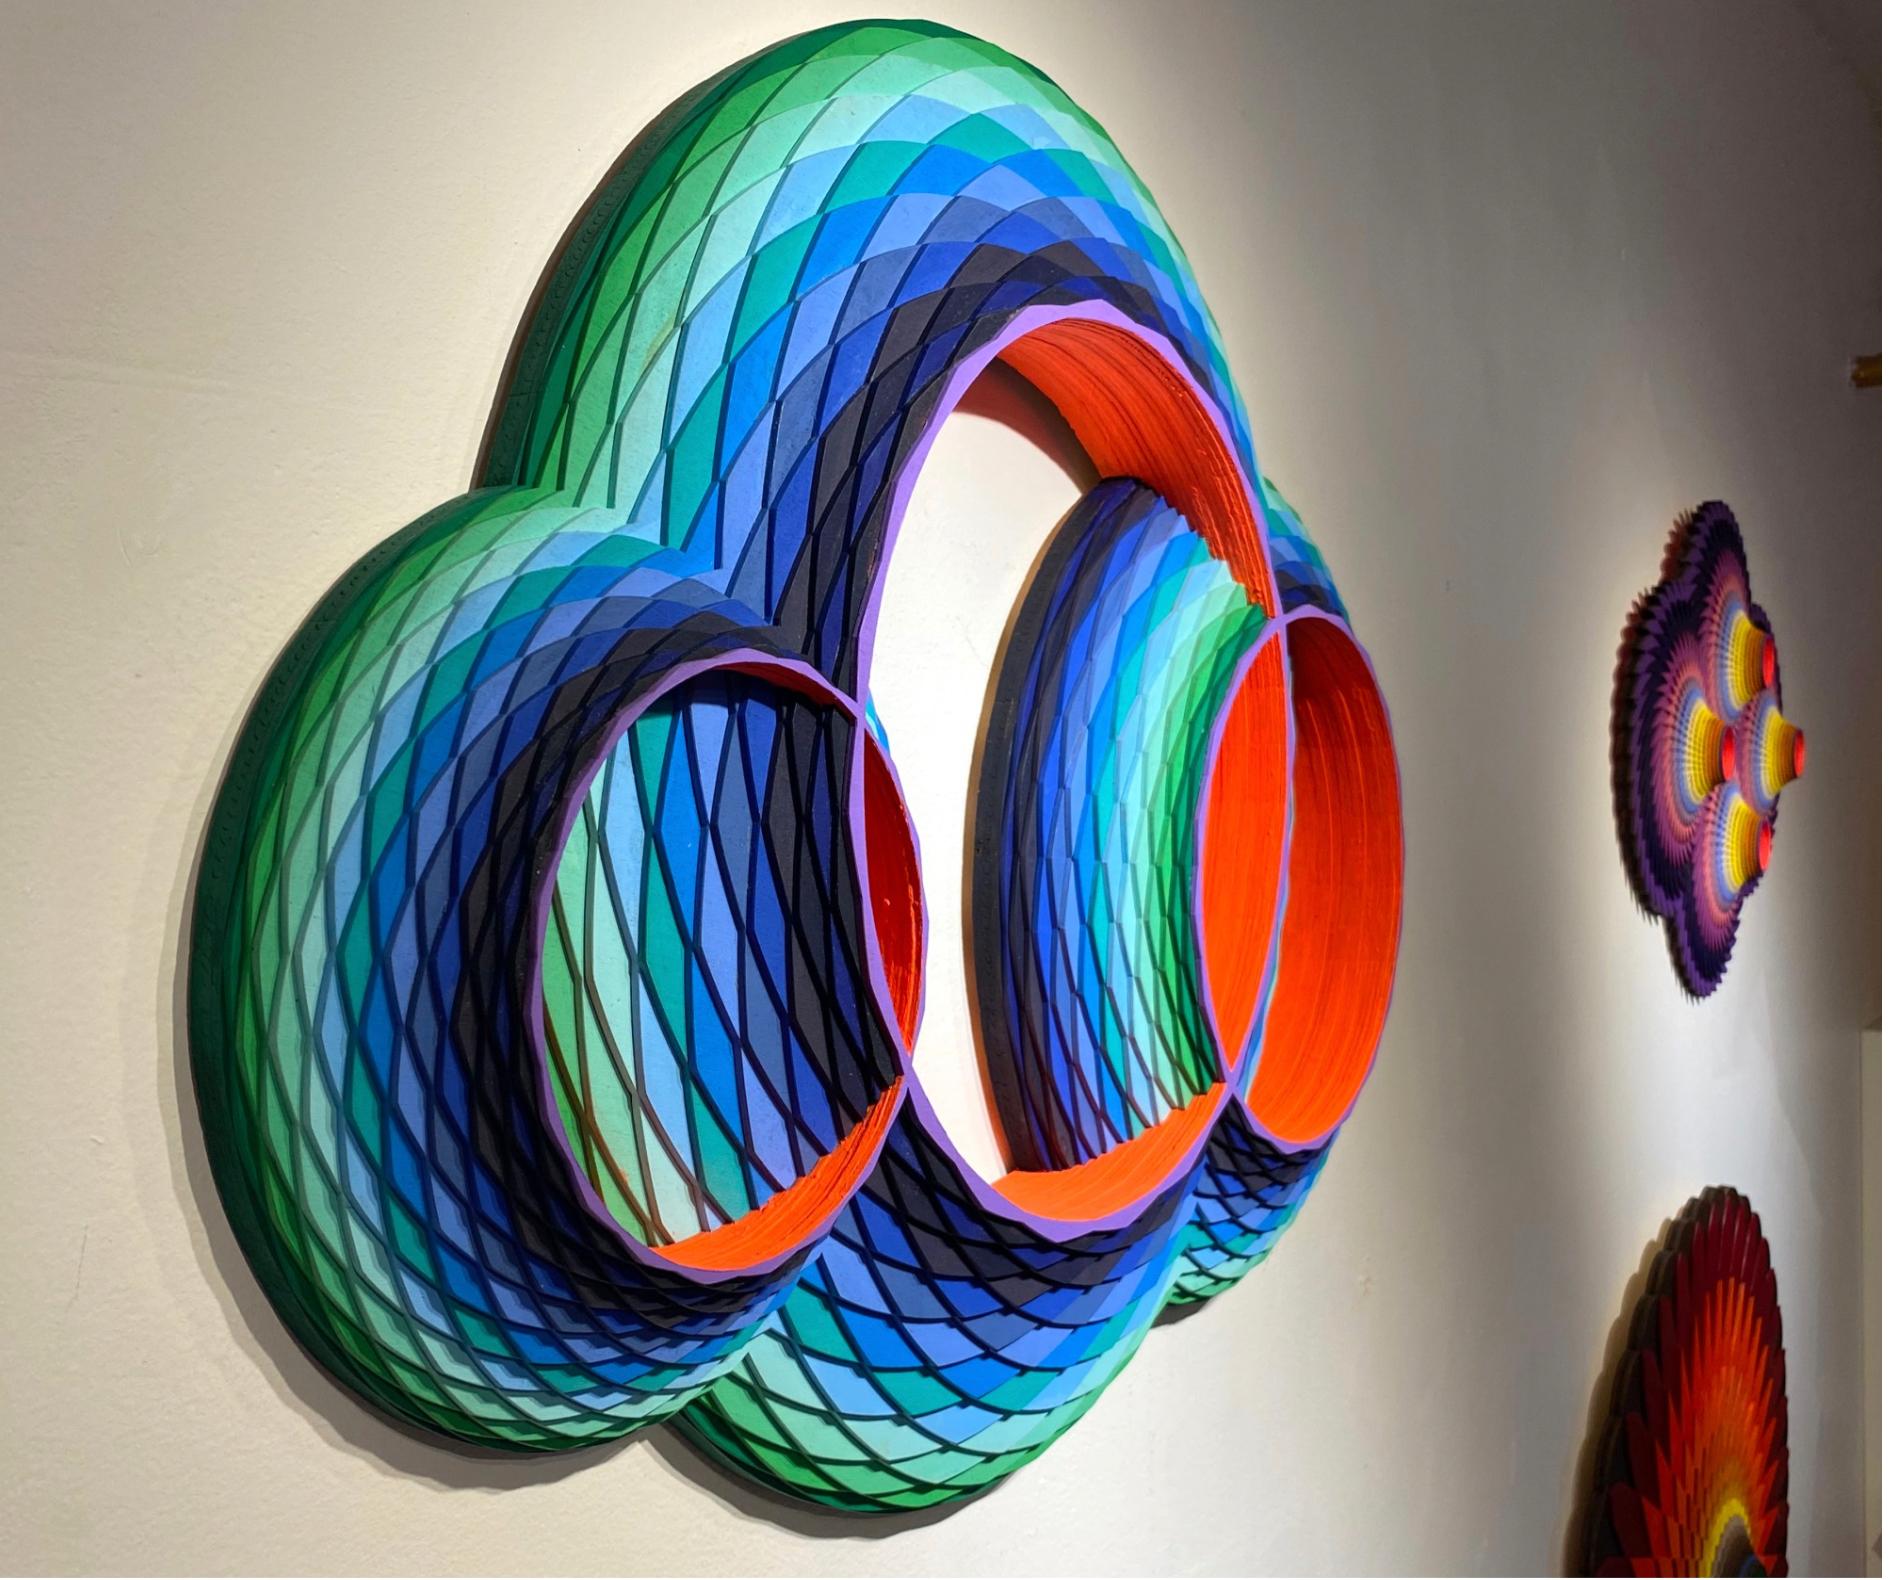 Multicolored circular geometric wall sculpture, acrylic on laser cut Wood by Christine Romanell. 
Hues of blue, orange, yellow, purple, swirls in geometric pattern with orange interior. 
Original signed by the artist on verso. Comes ready to